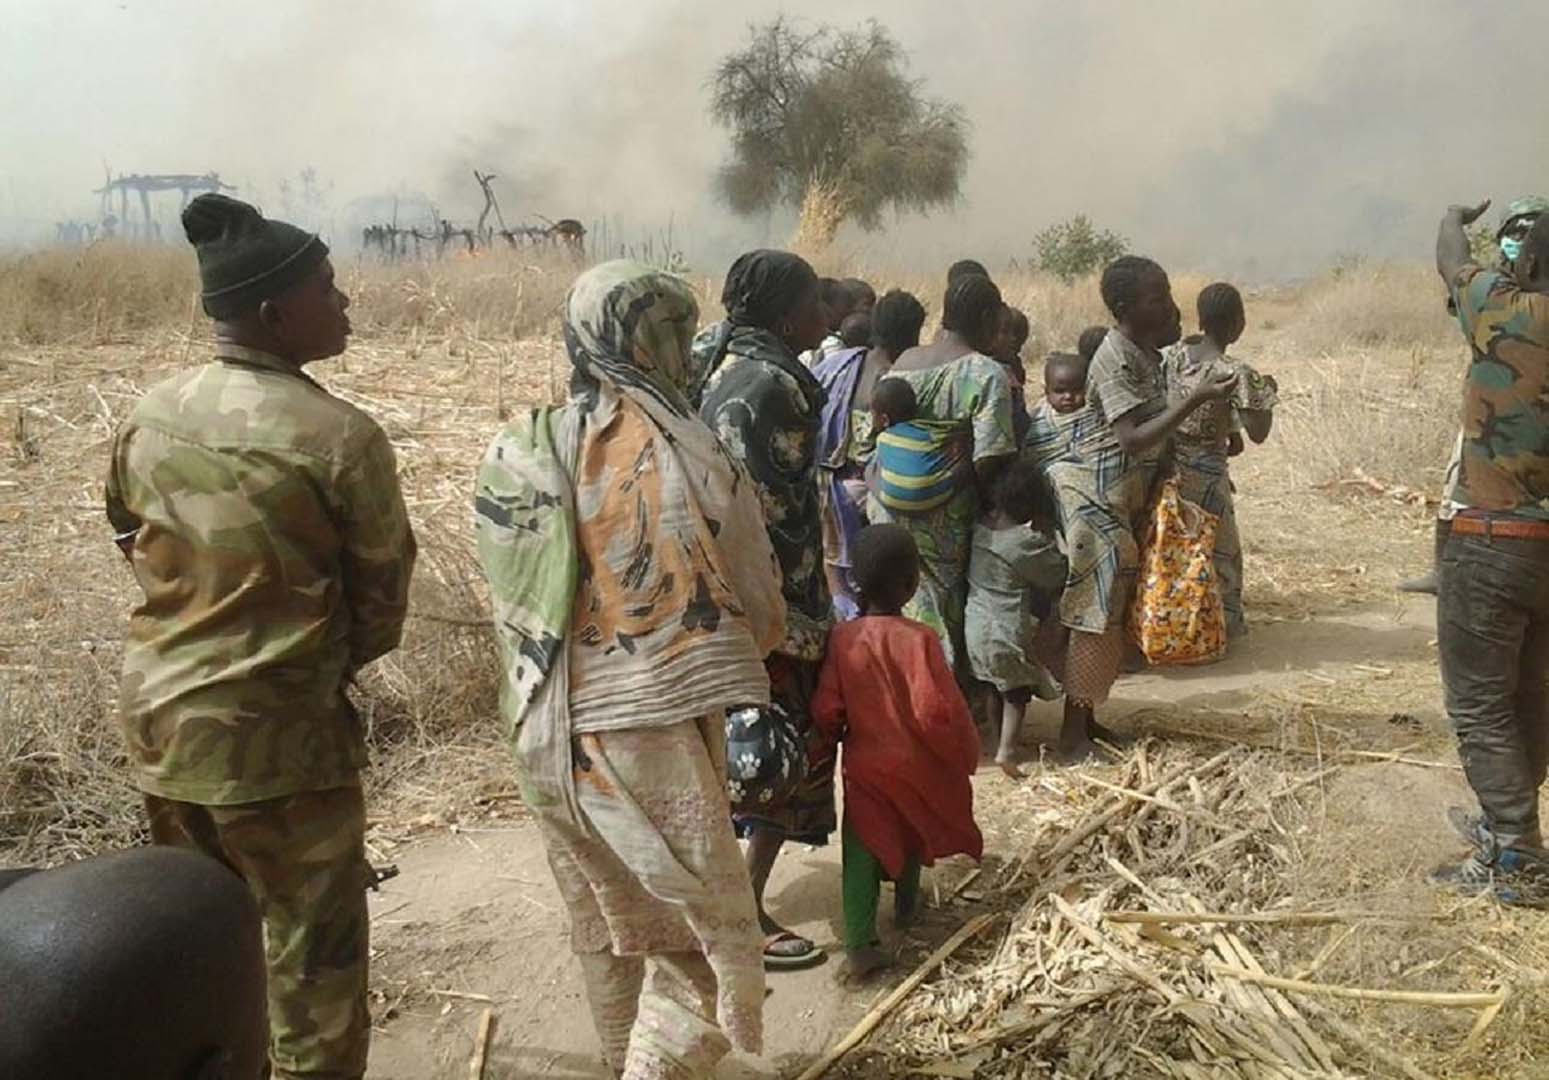 A group of people stand in line, two apparent military men are around them. In the distance we see a village burning. 